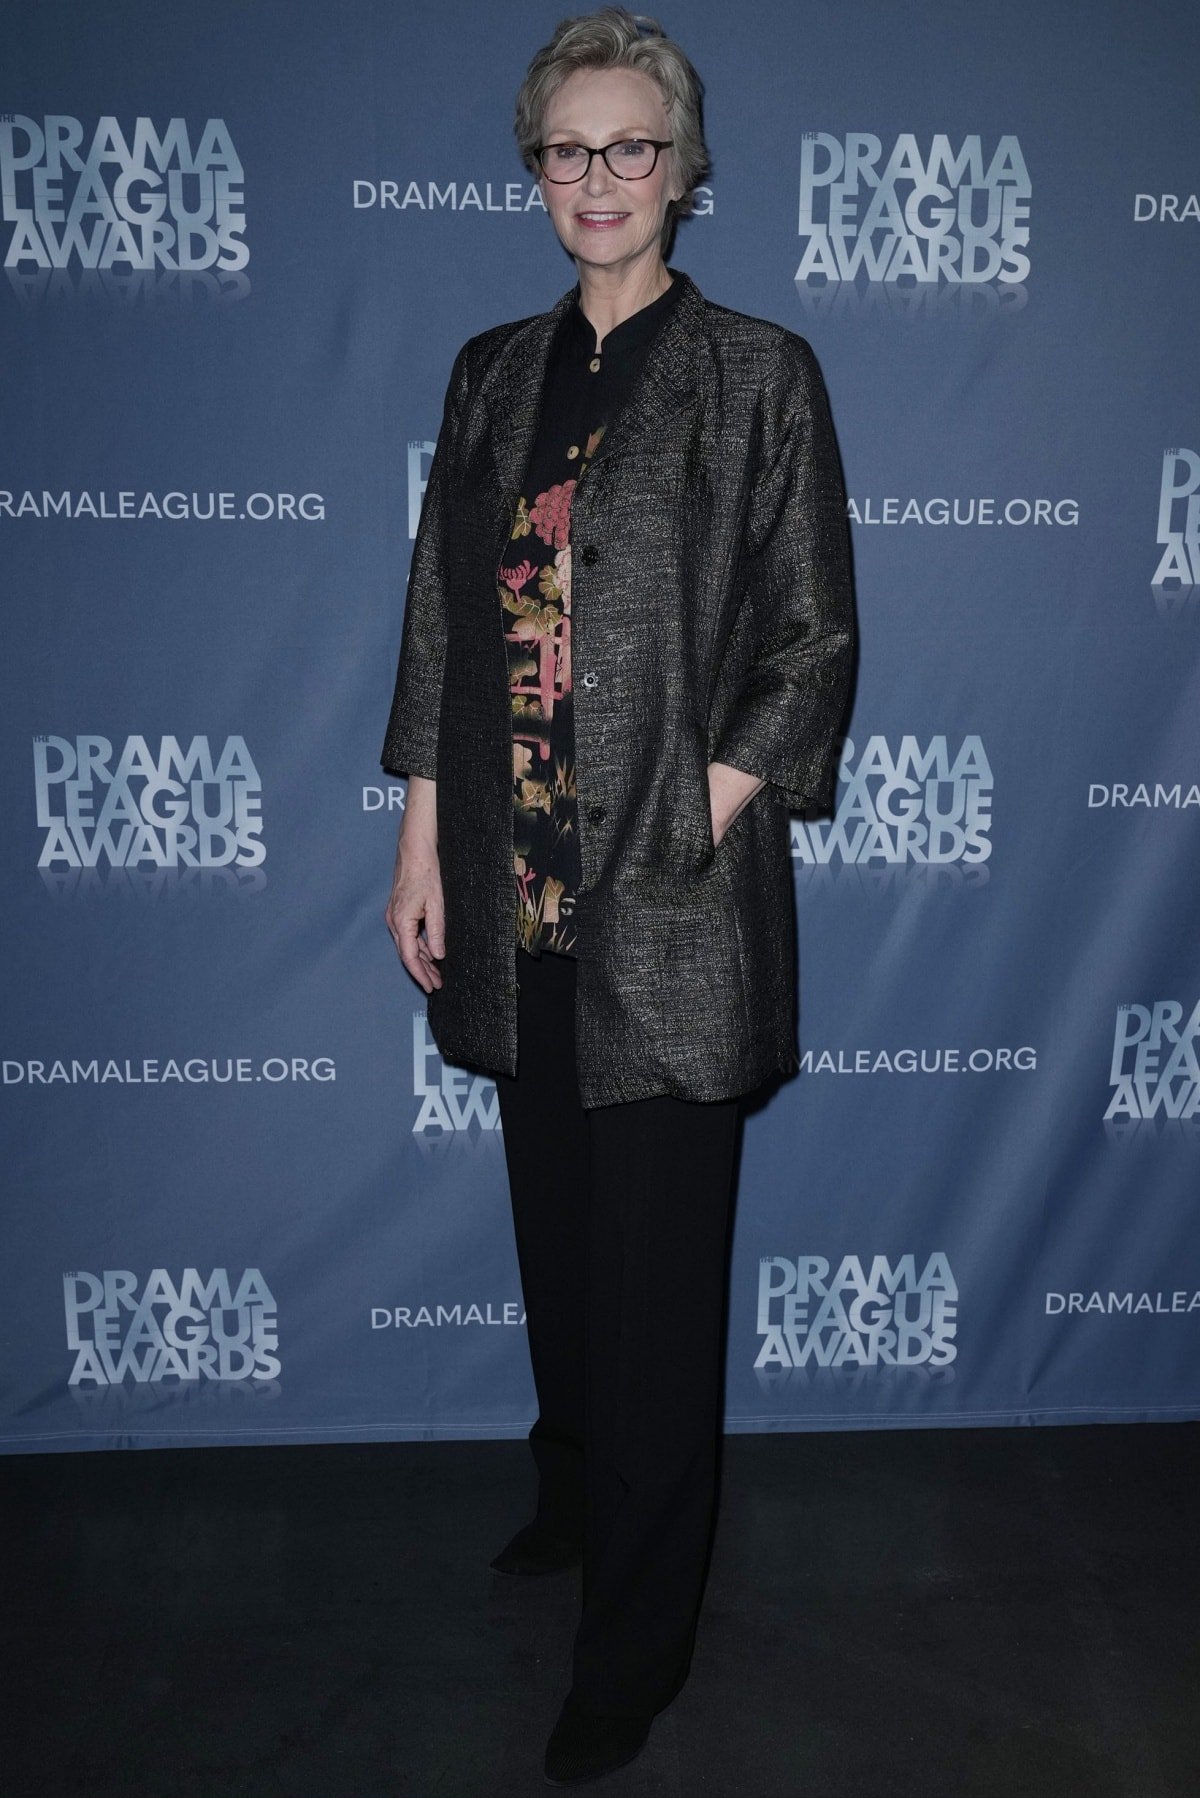 Jane Lynch looking every bit the thespian at the 2022 Drama League Awards